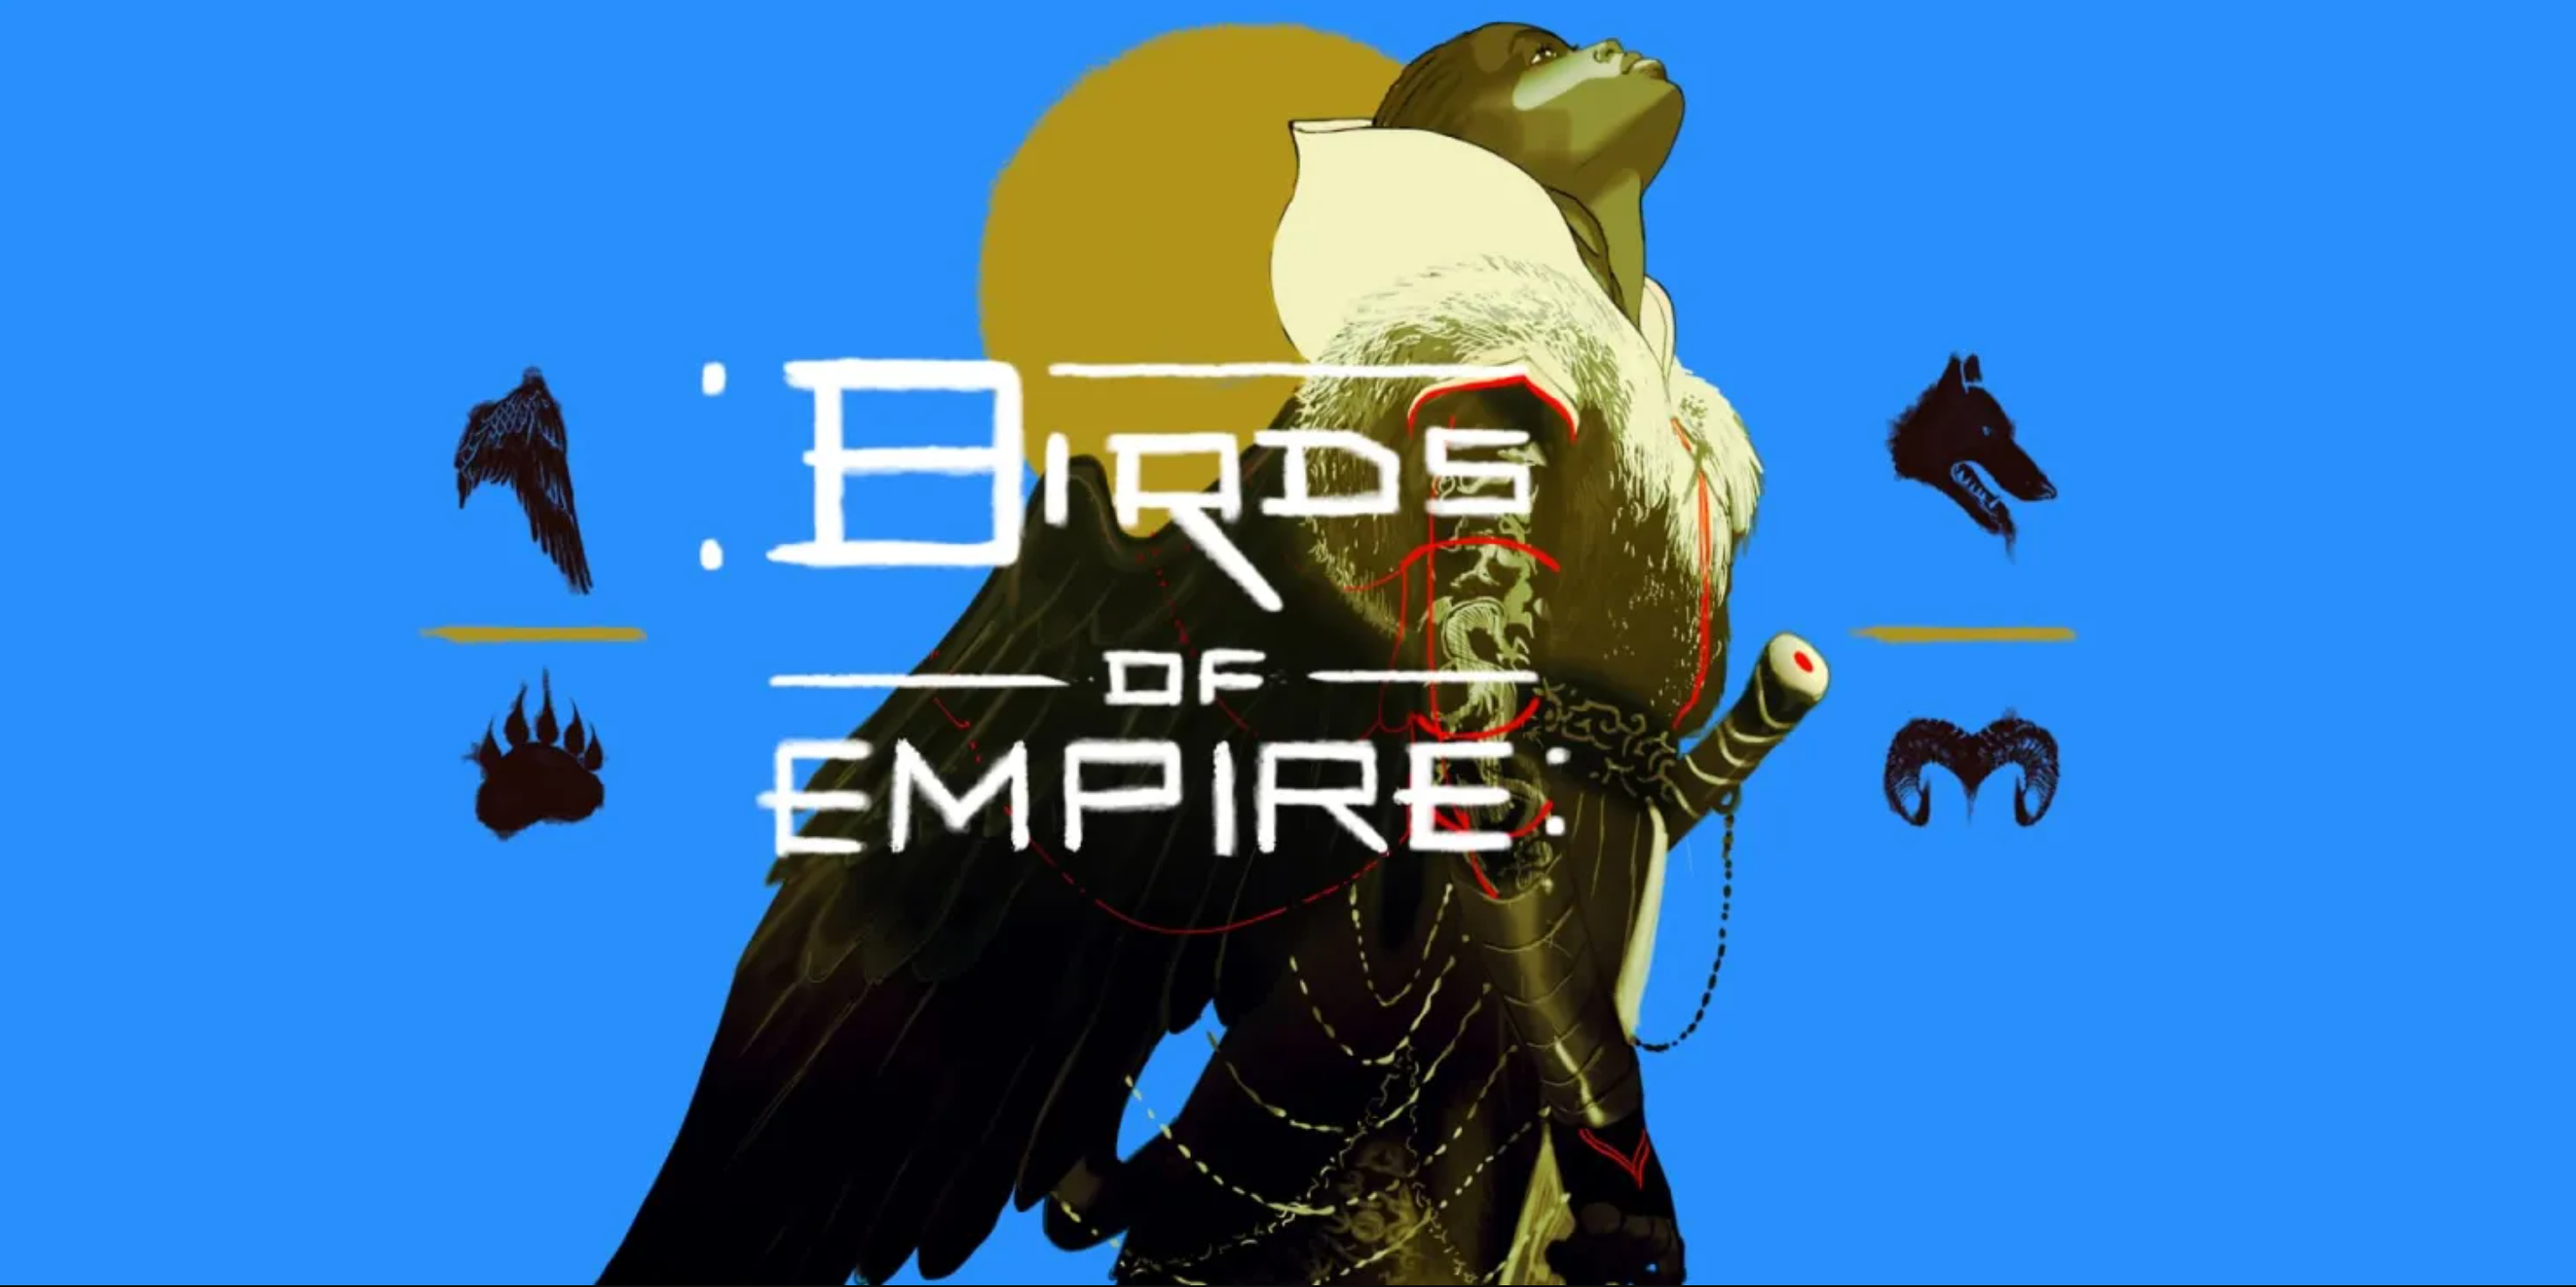 Cover art for Birds of Empire, featuring a person with wings and a sword looking up against a blue background and gold sun. There are four icons around them: a wing, a bear claw, a wolf head, and ram's horns.